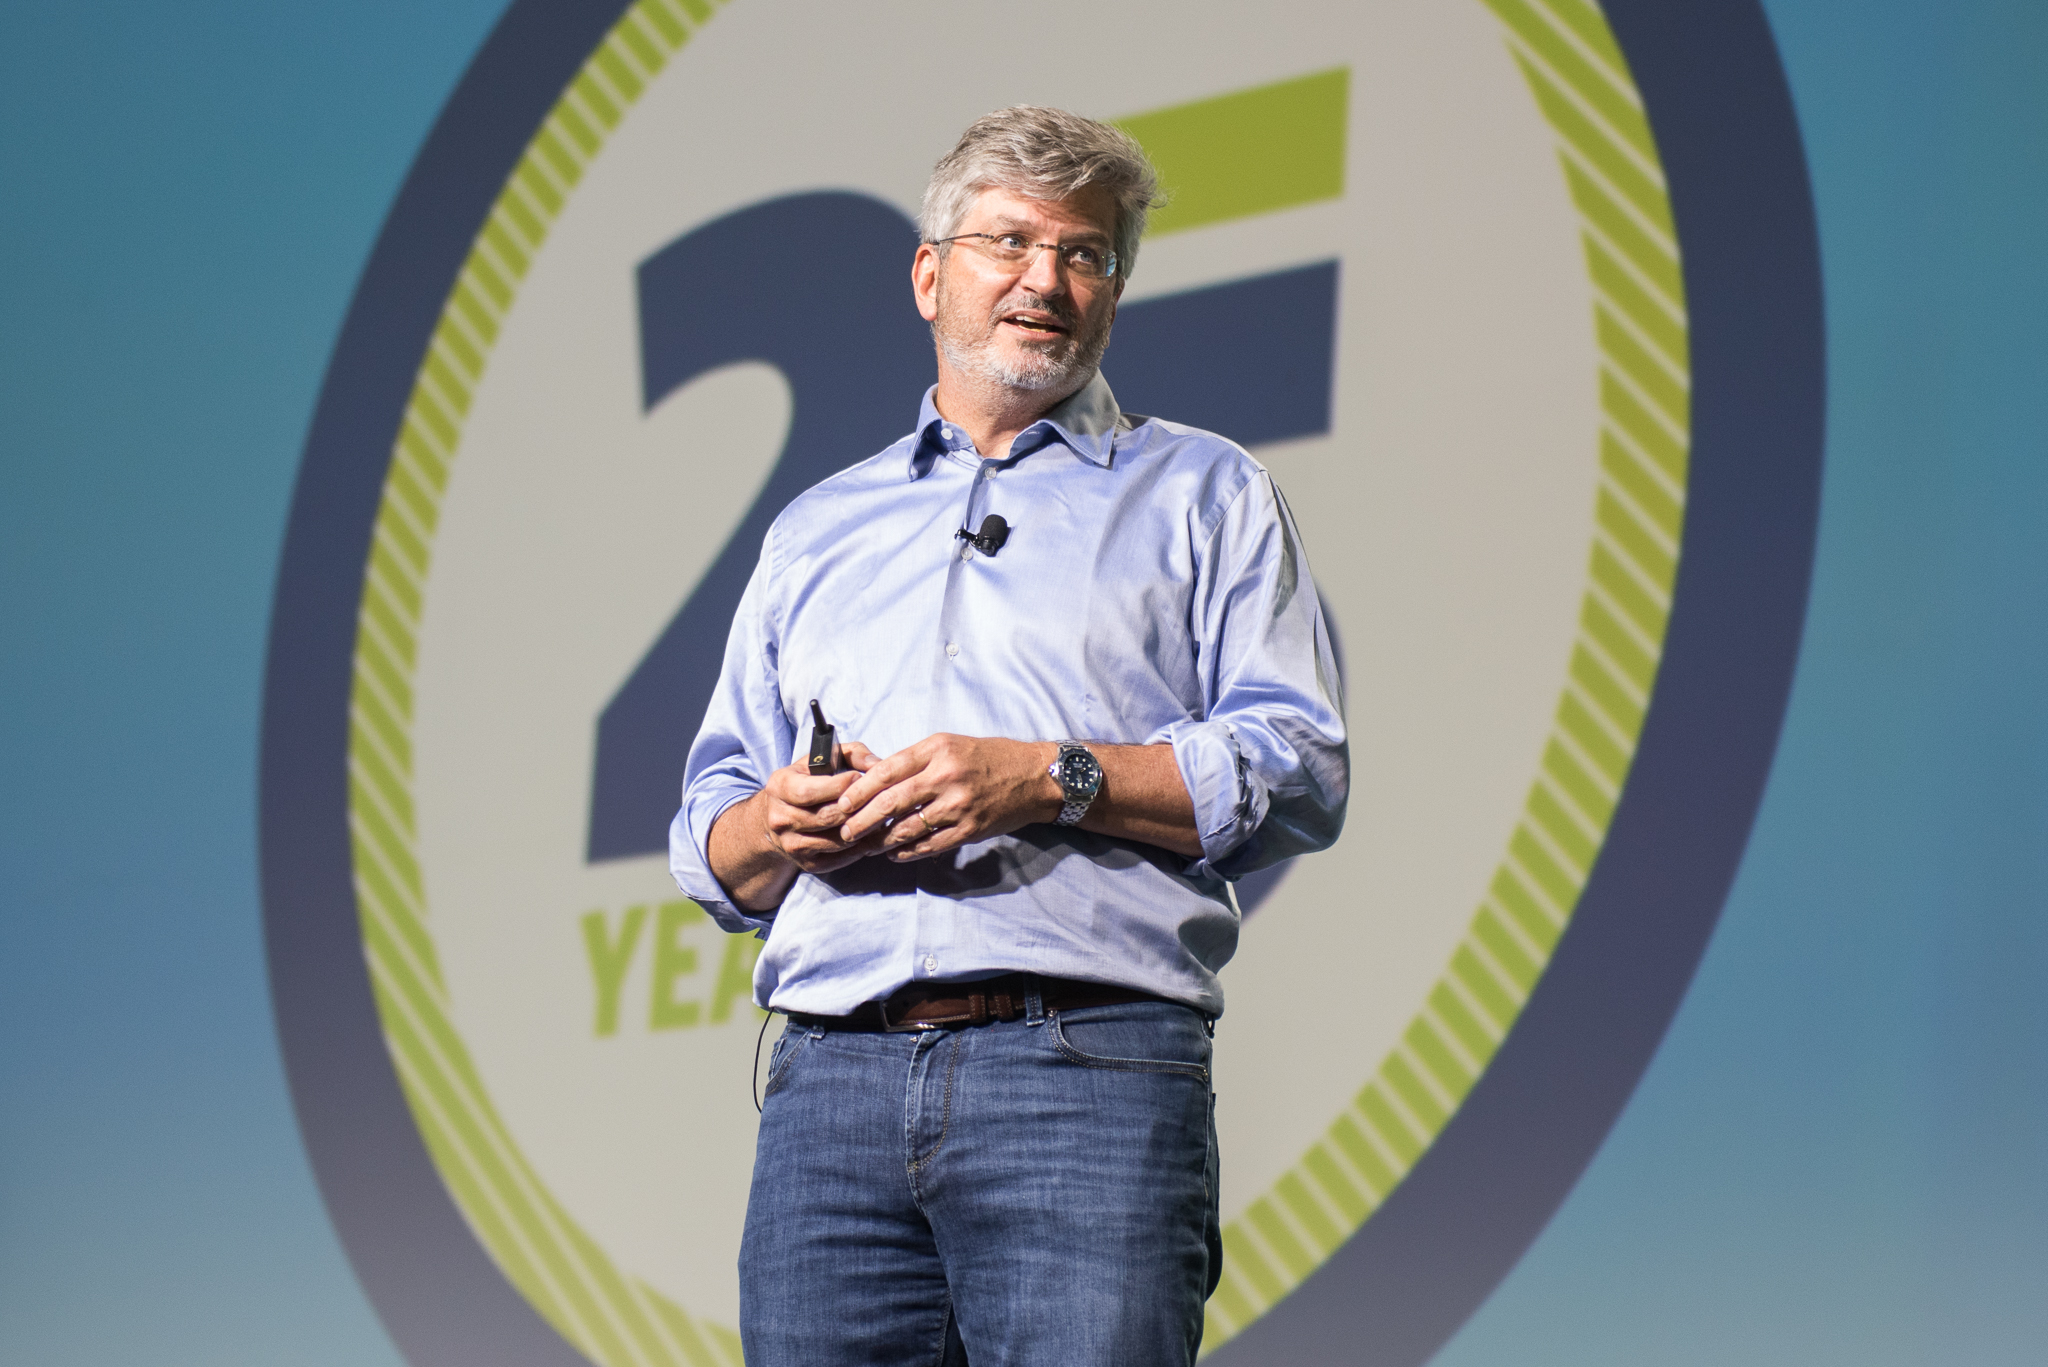 Photo shows Richard Barth, CEO of the KIPP Foundation, speaking on stage at the 2019 KIPP School Summit